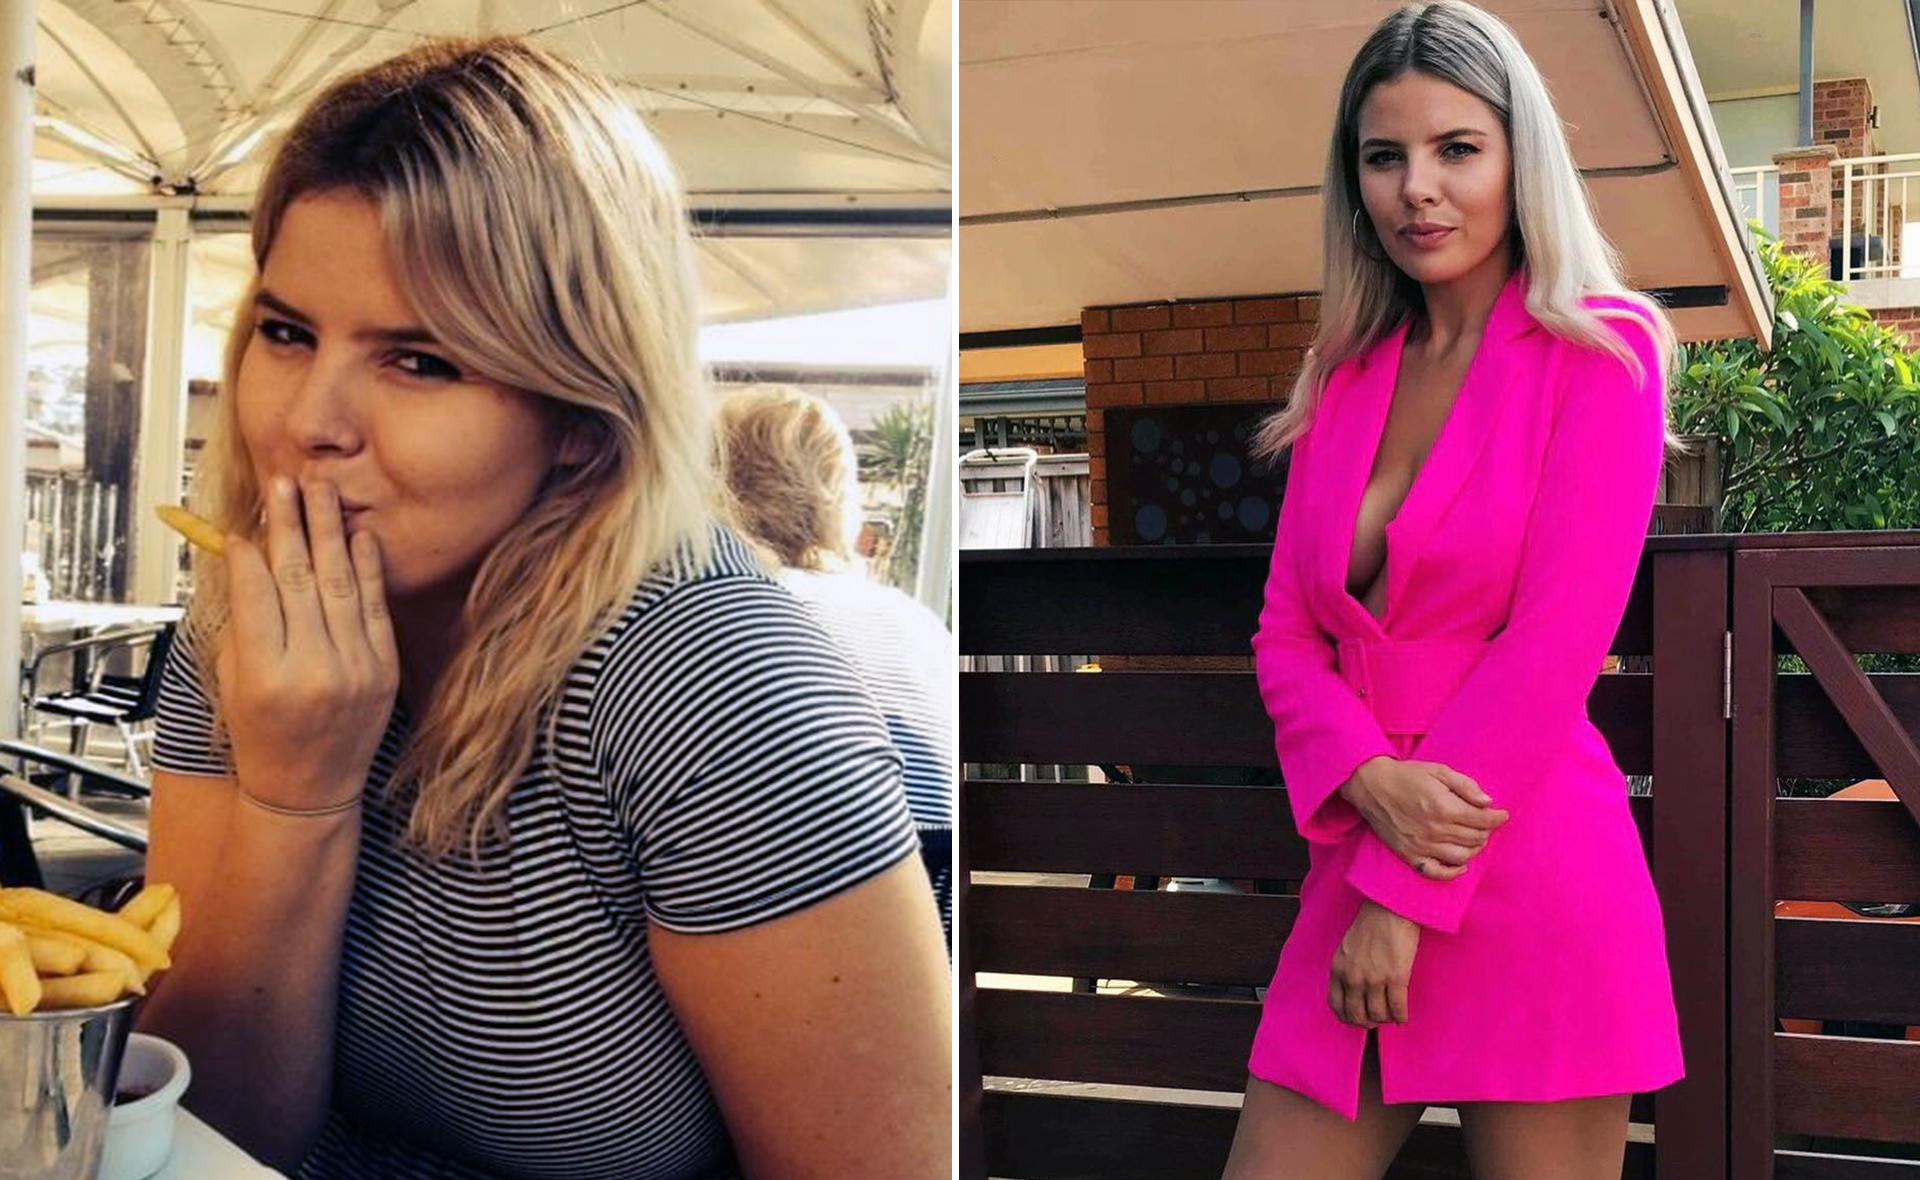 EXCLUSIVE: Married At First Sight’s Olivia Frazer lost 25 kilos after surgery that transformed her life